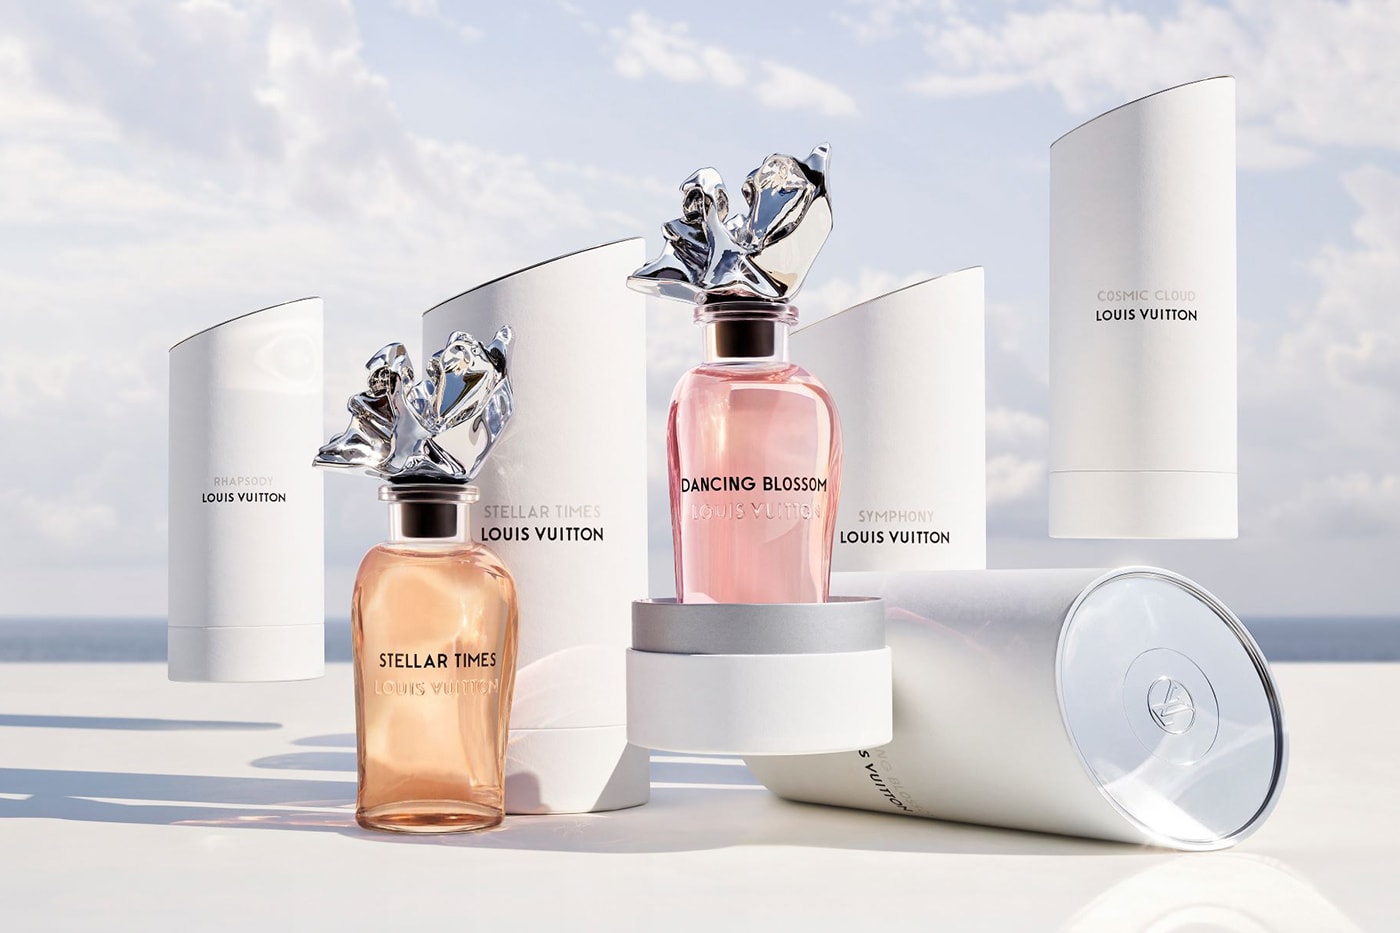 Why Louis Vuitton's Long-Anticipated Fragrance Collection Was